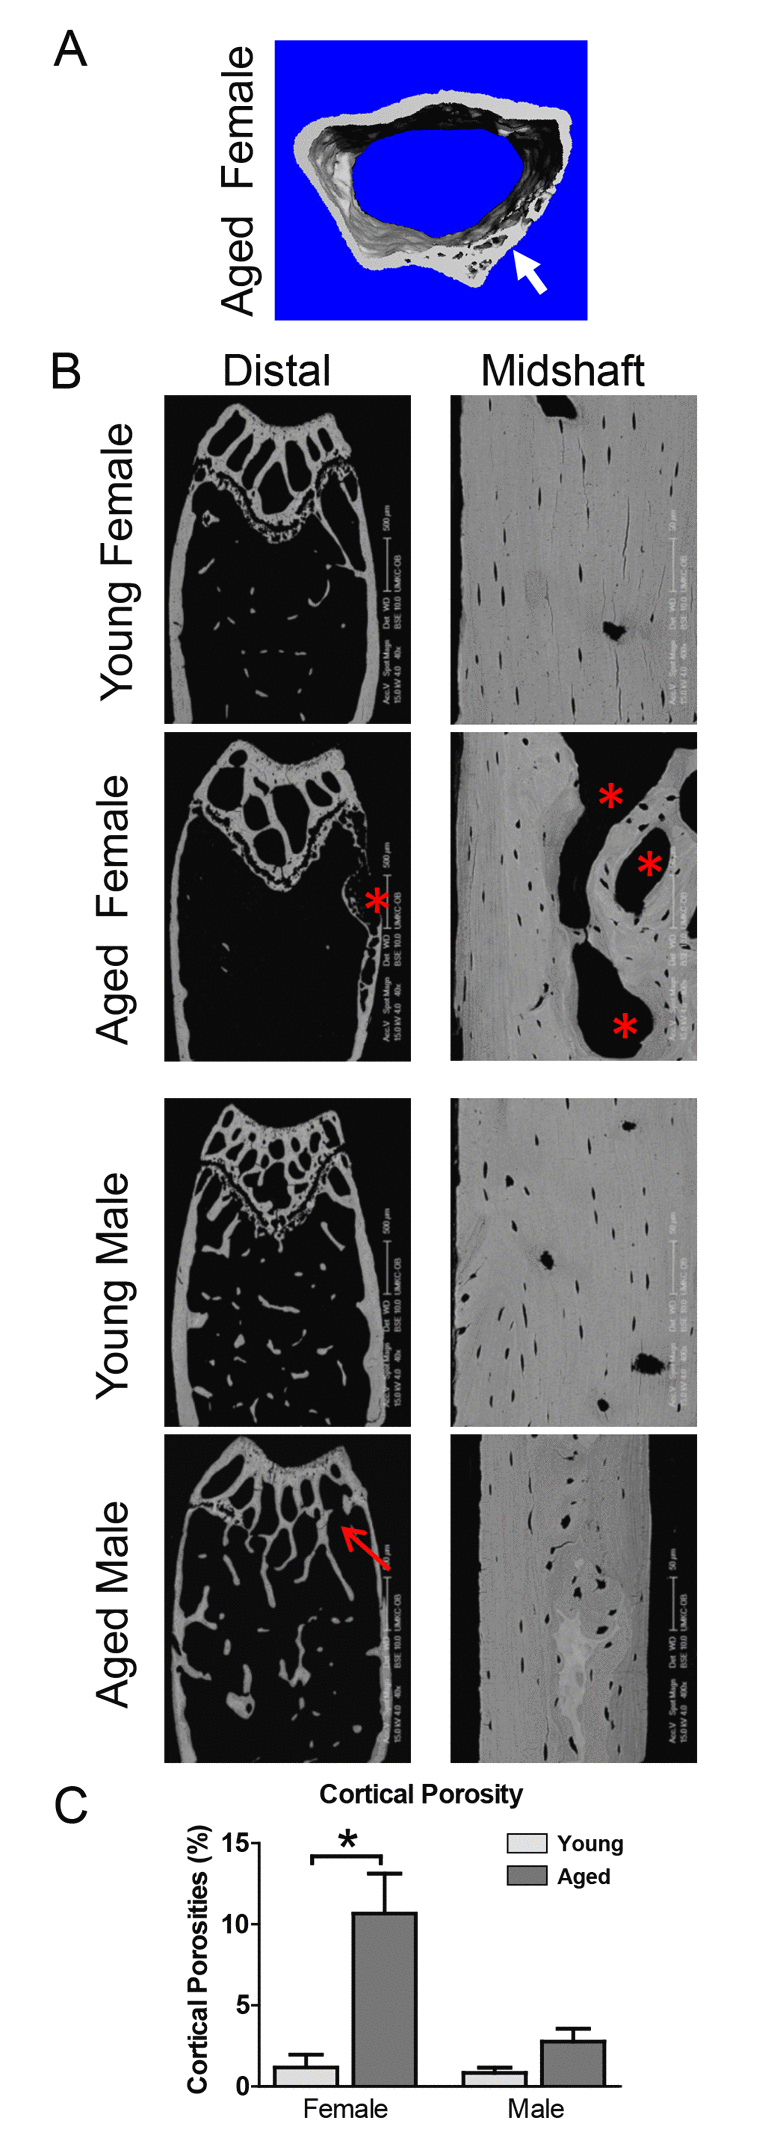 Aging is associated with cortical porosities, regional variation in mineral density and growth plate closure. (A) microCT reconstruction of distal femur cortical bone in an aged female showing cortical porosity (arrow). (B) BSEM image of the distal femur (Bar = 500μm) and midshaft cortical bone (Bar = 50μm) in young and aged C57BL/6 mice. Arrow indicates growth plate closure in the aged male and * indicates cortical porosities. (C) Quantitation of cortical porosity from n=5 animals showing a significant increase in cortical porosity in female C57BL/6 mice with age.